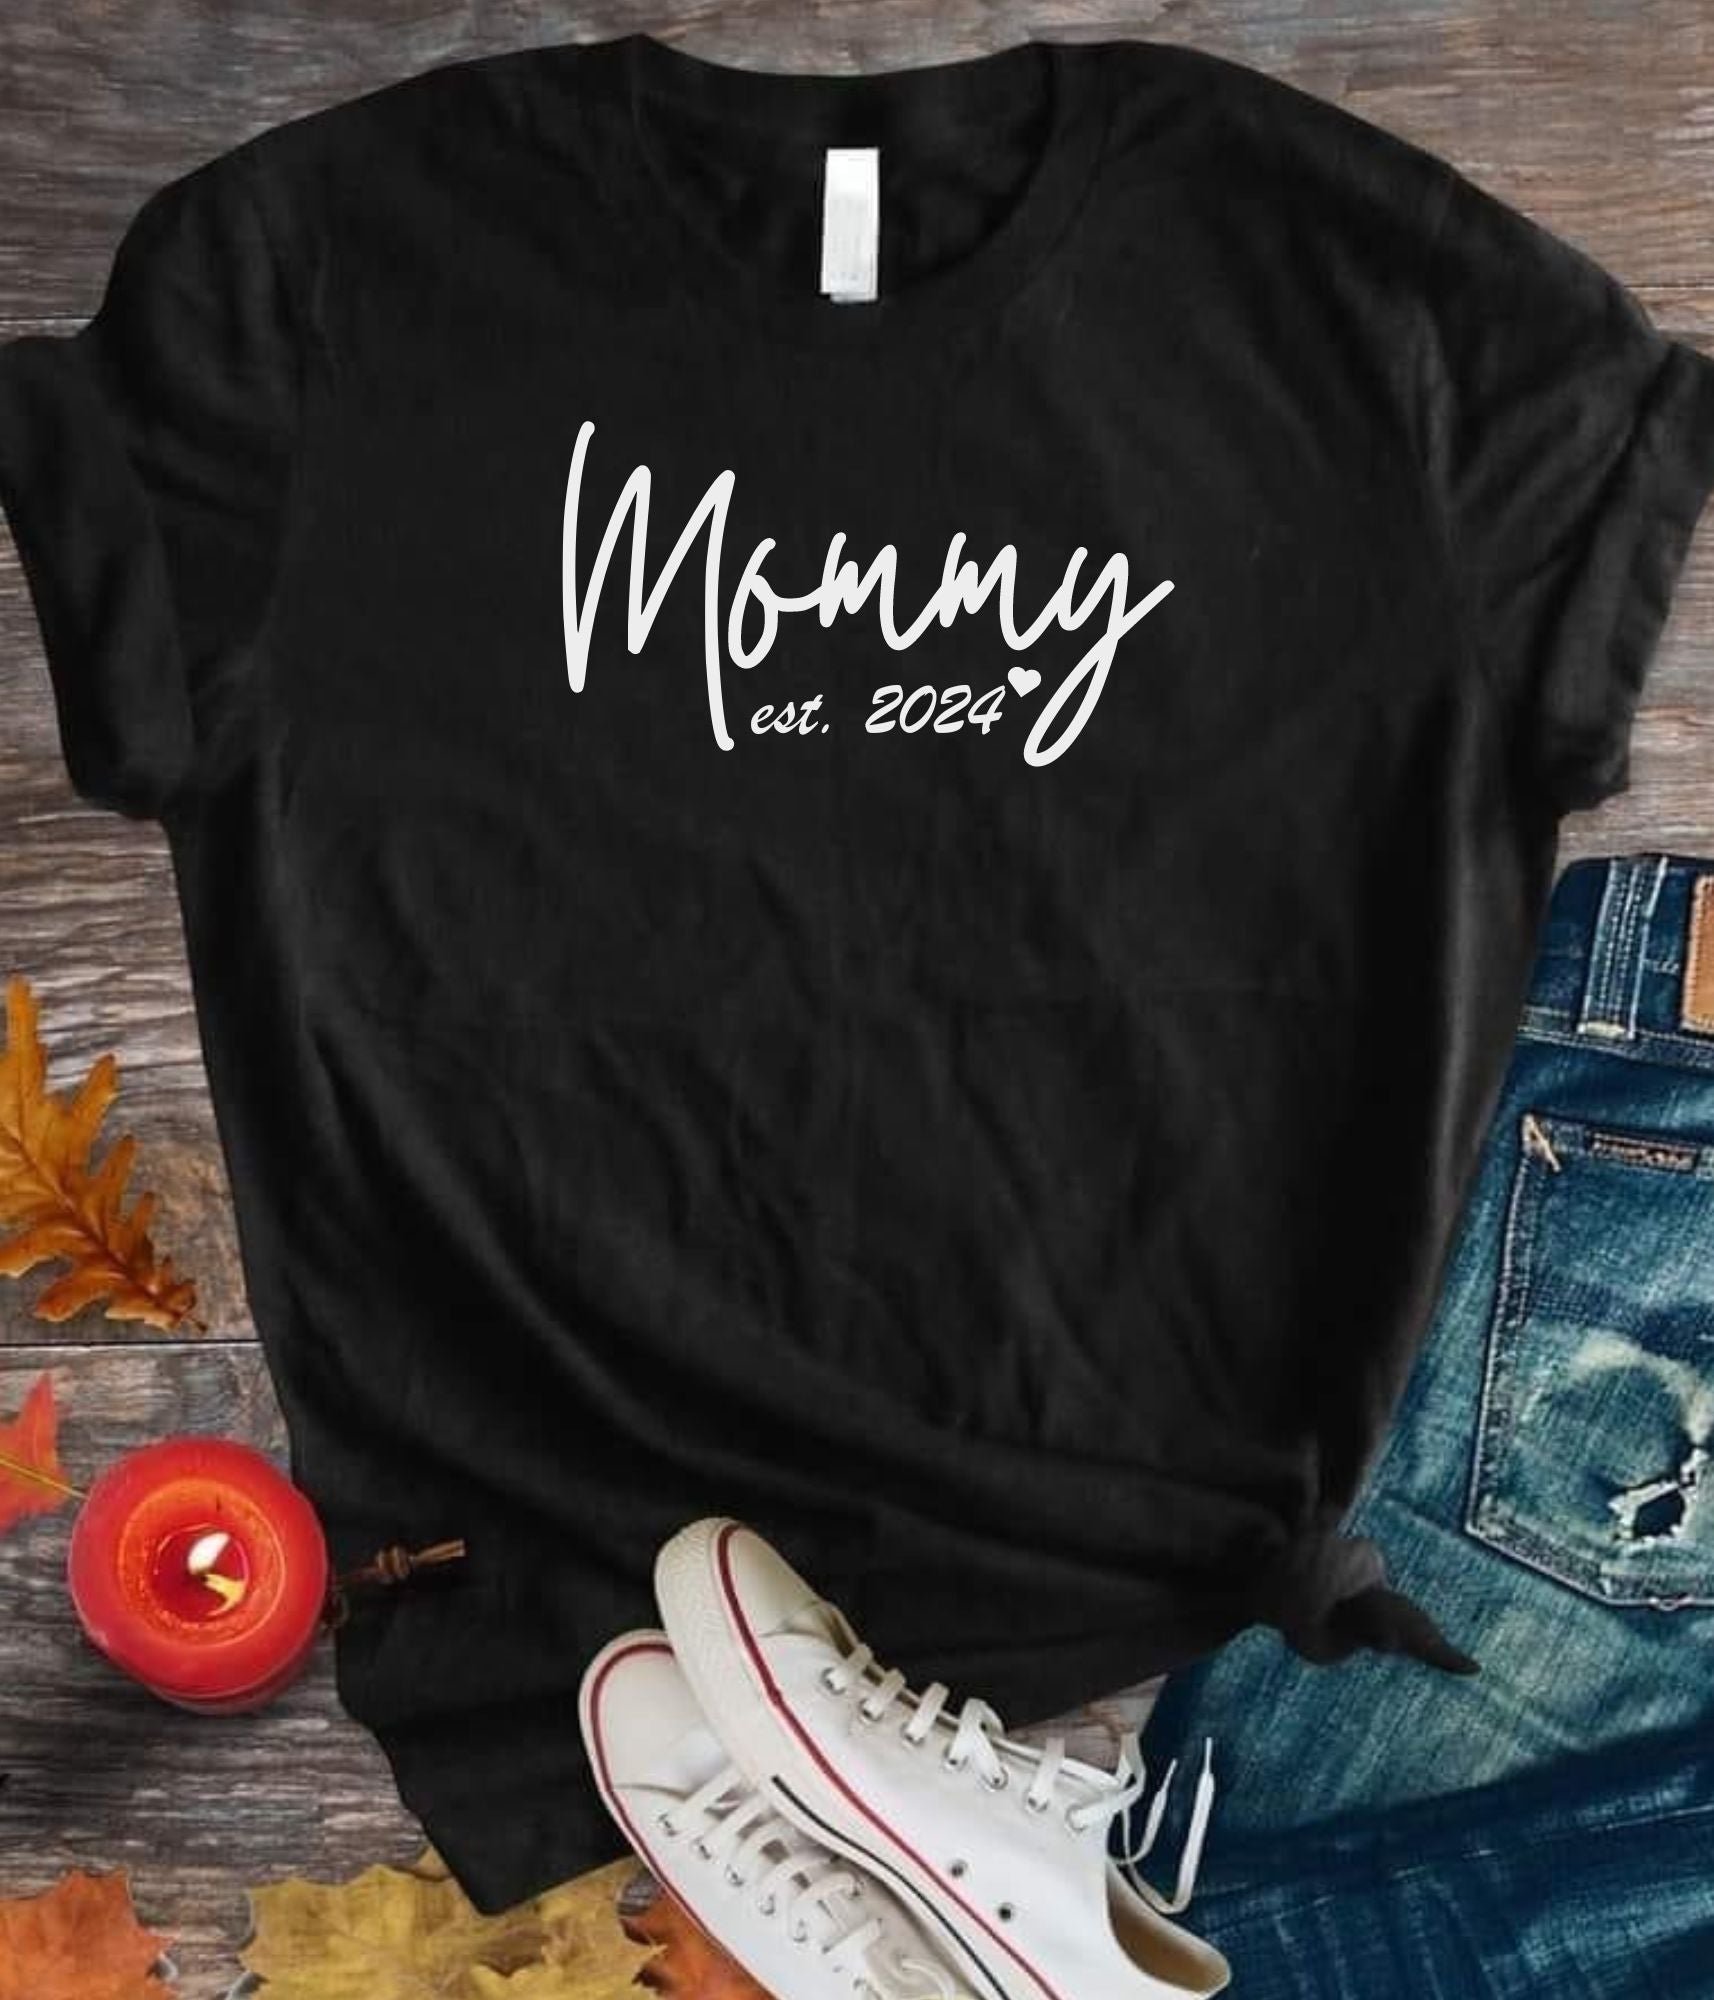 New Mommy T-shirt just in time for Mother's day. Great gift for the new mom. T-shirt reads "Mommy, est. 2024" with a little heart.